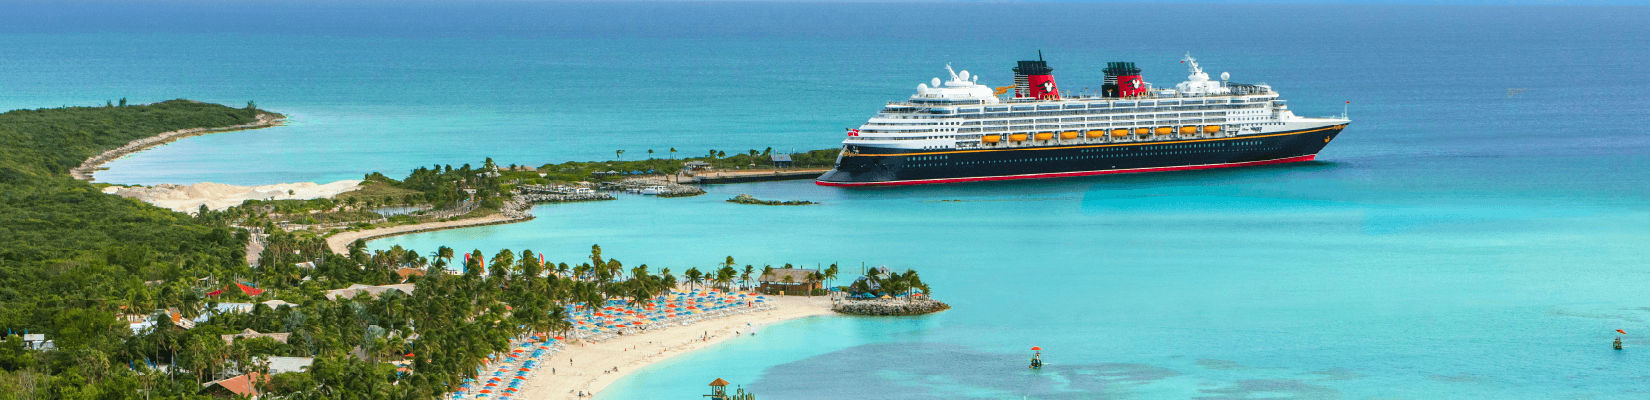 A Disney Cruise Ship pulling into a tropical port.